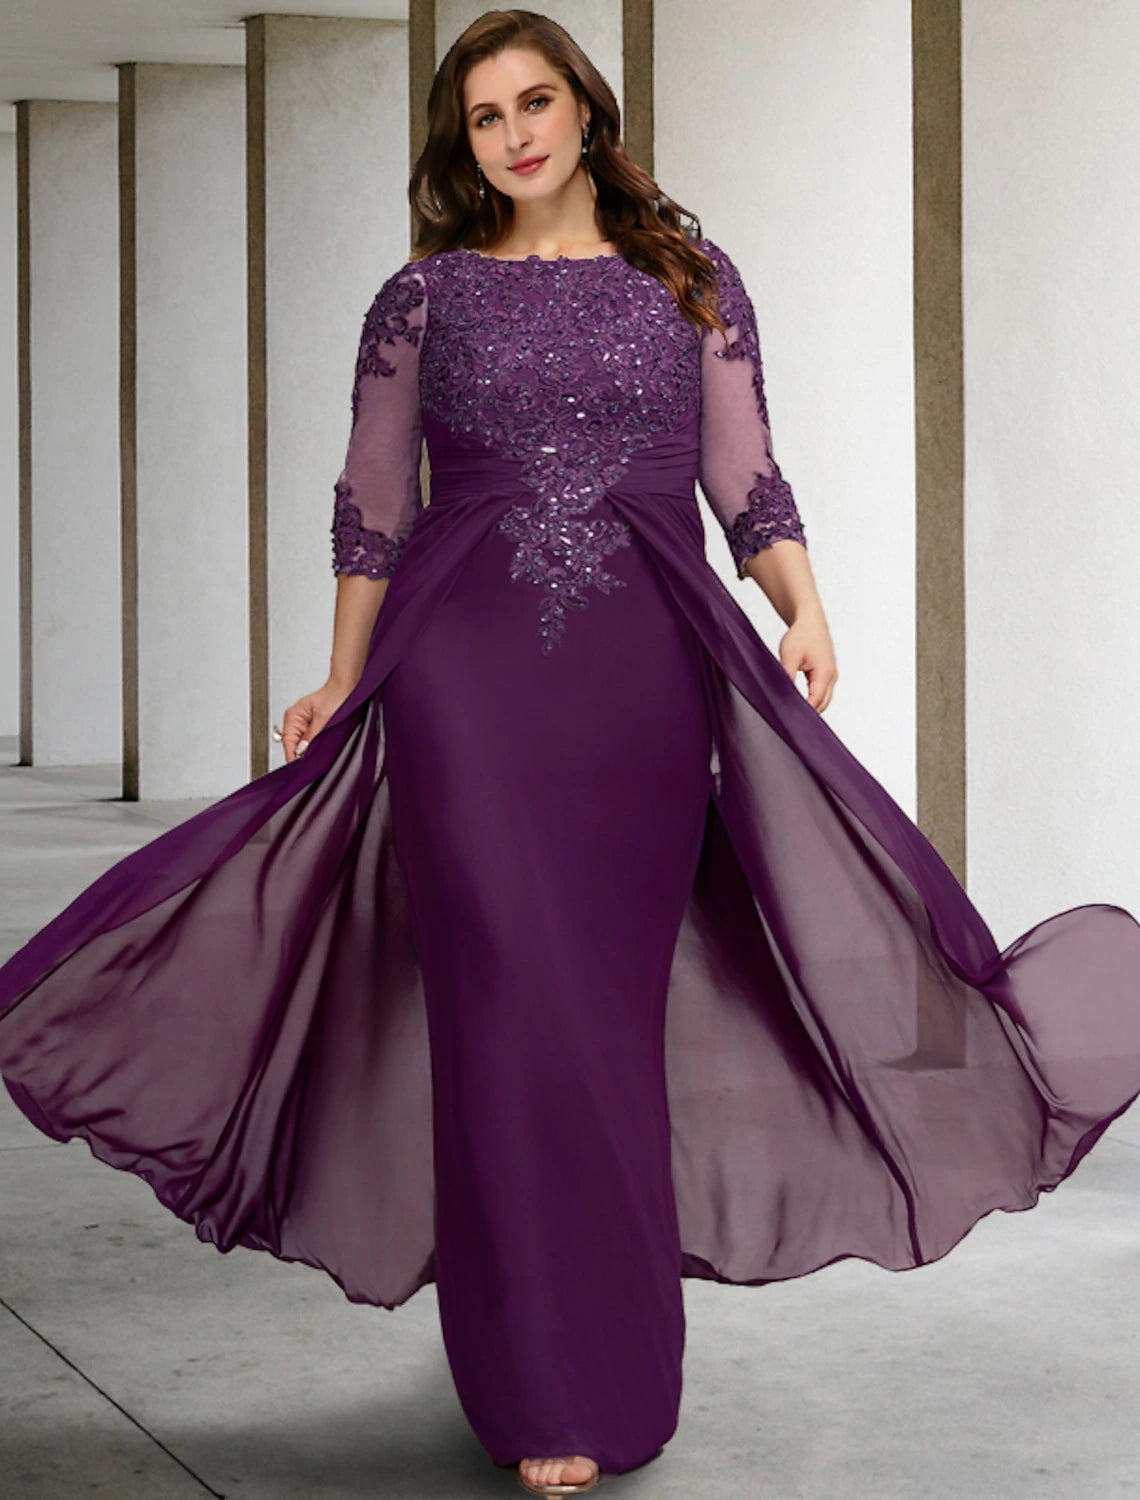 Sheath / Column Plus Size Curve Mother of the Bride Dresses Elegant Dress Formal Wedding Guest Floor Length Half Sleeve Jewel Neck Chiffon with Ruched Beading Appliques